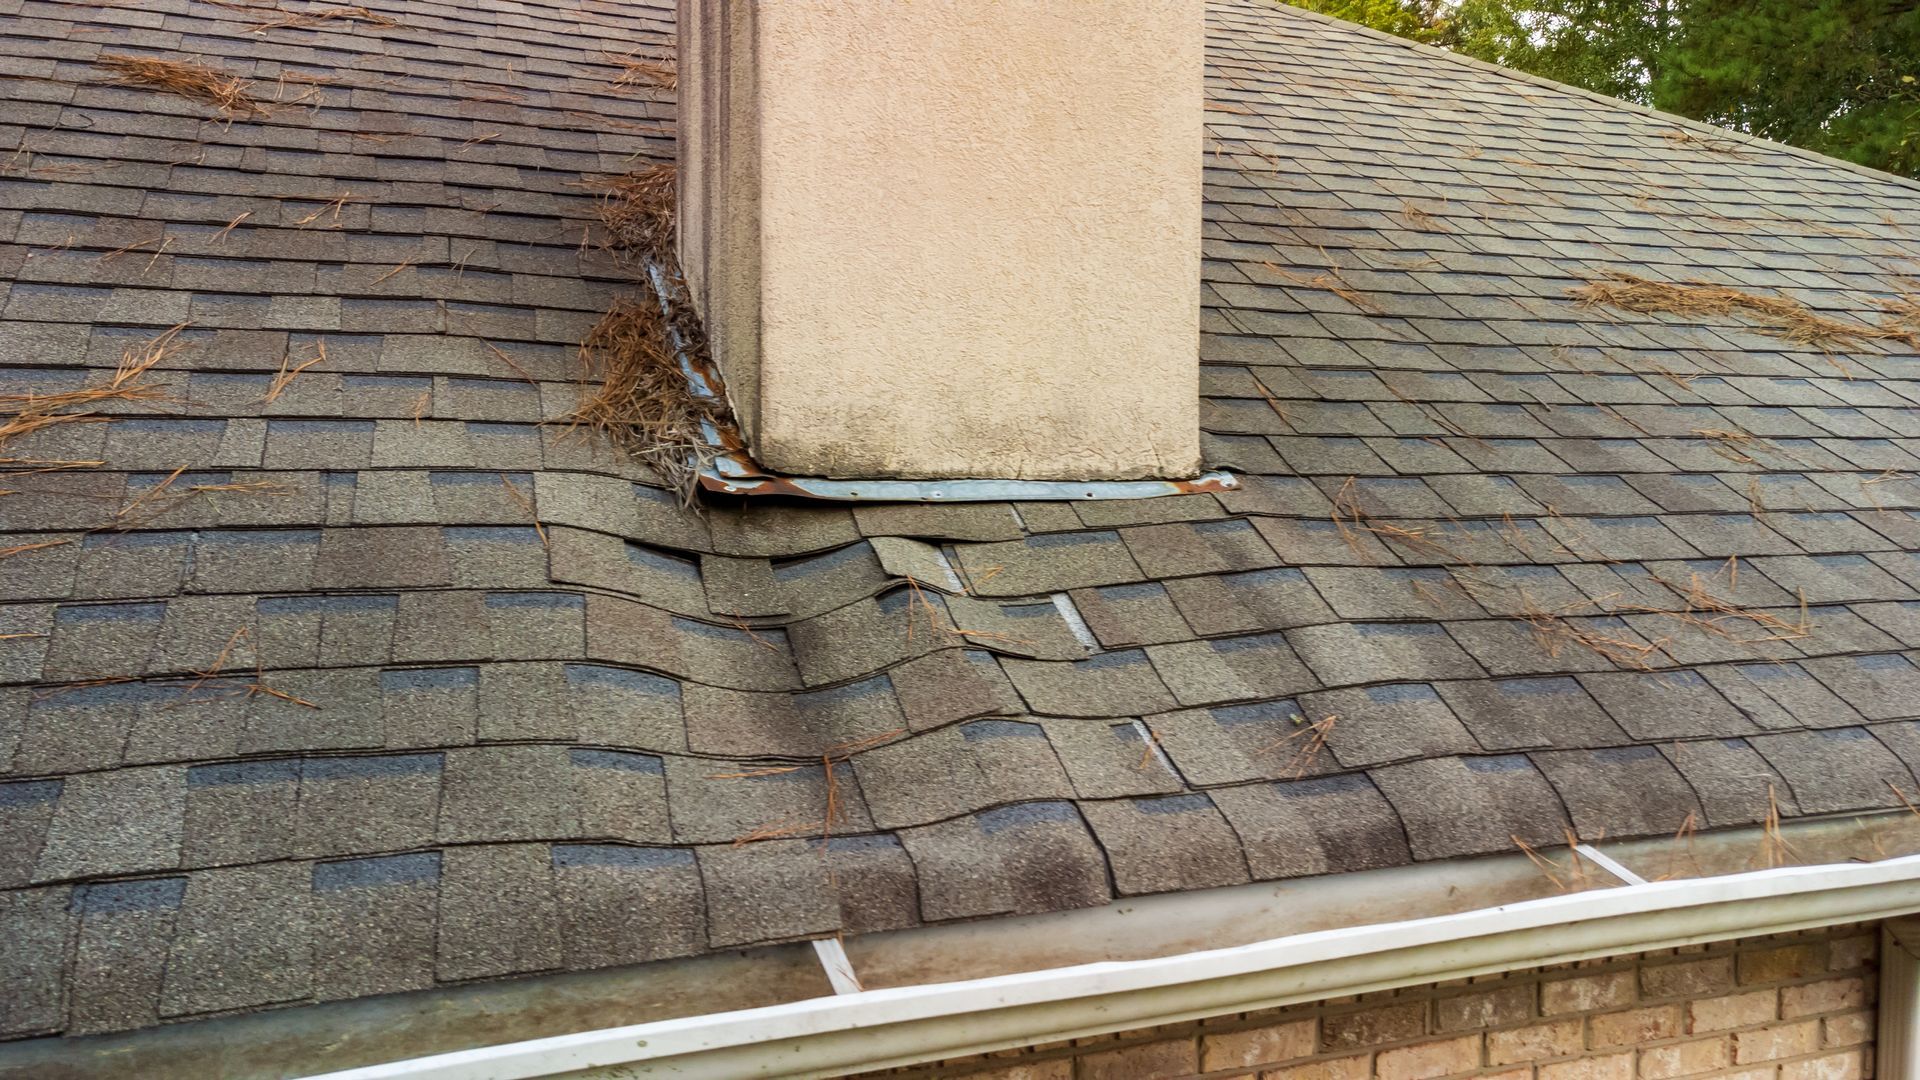 Damaged Chimney And Roof